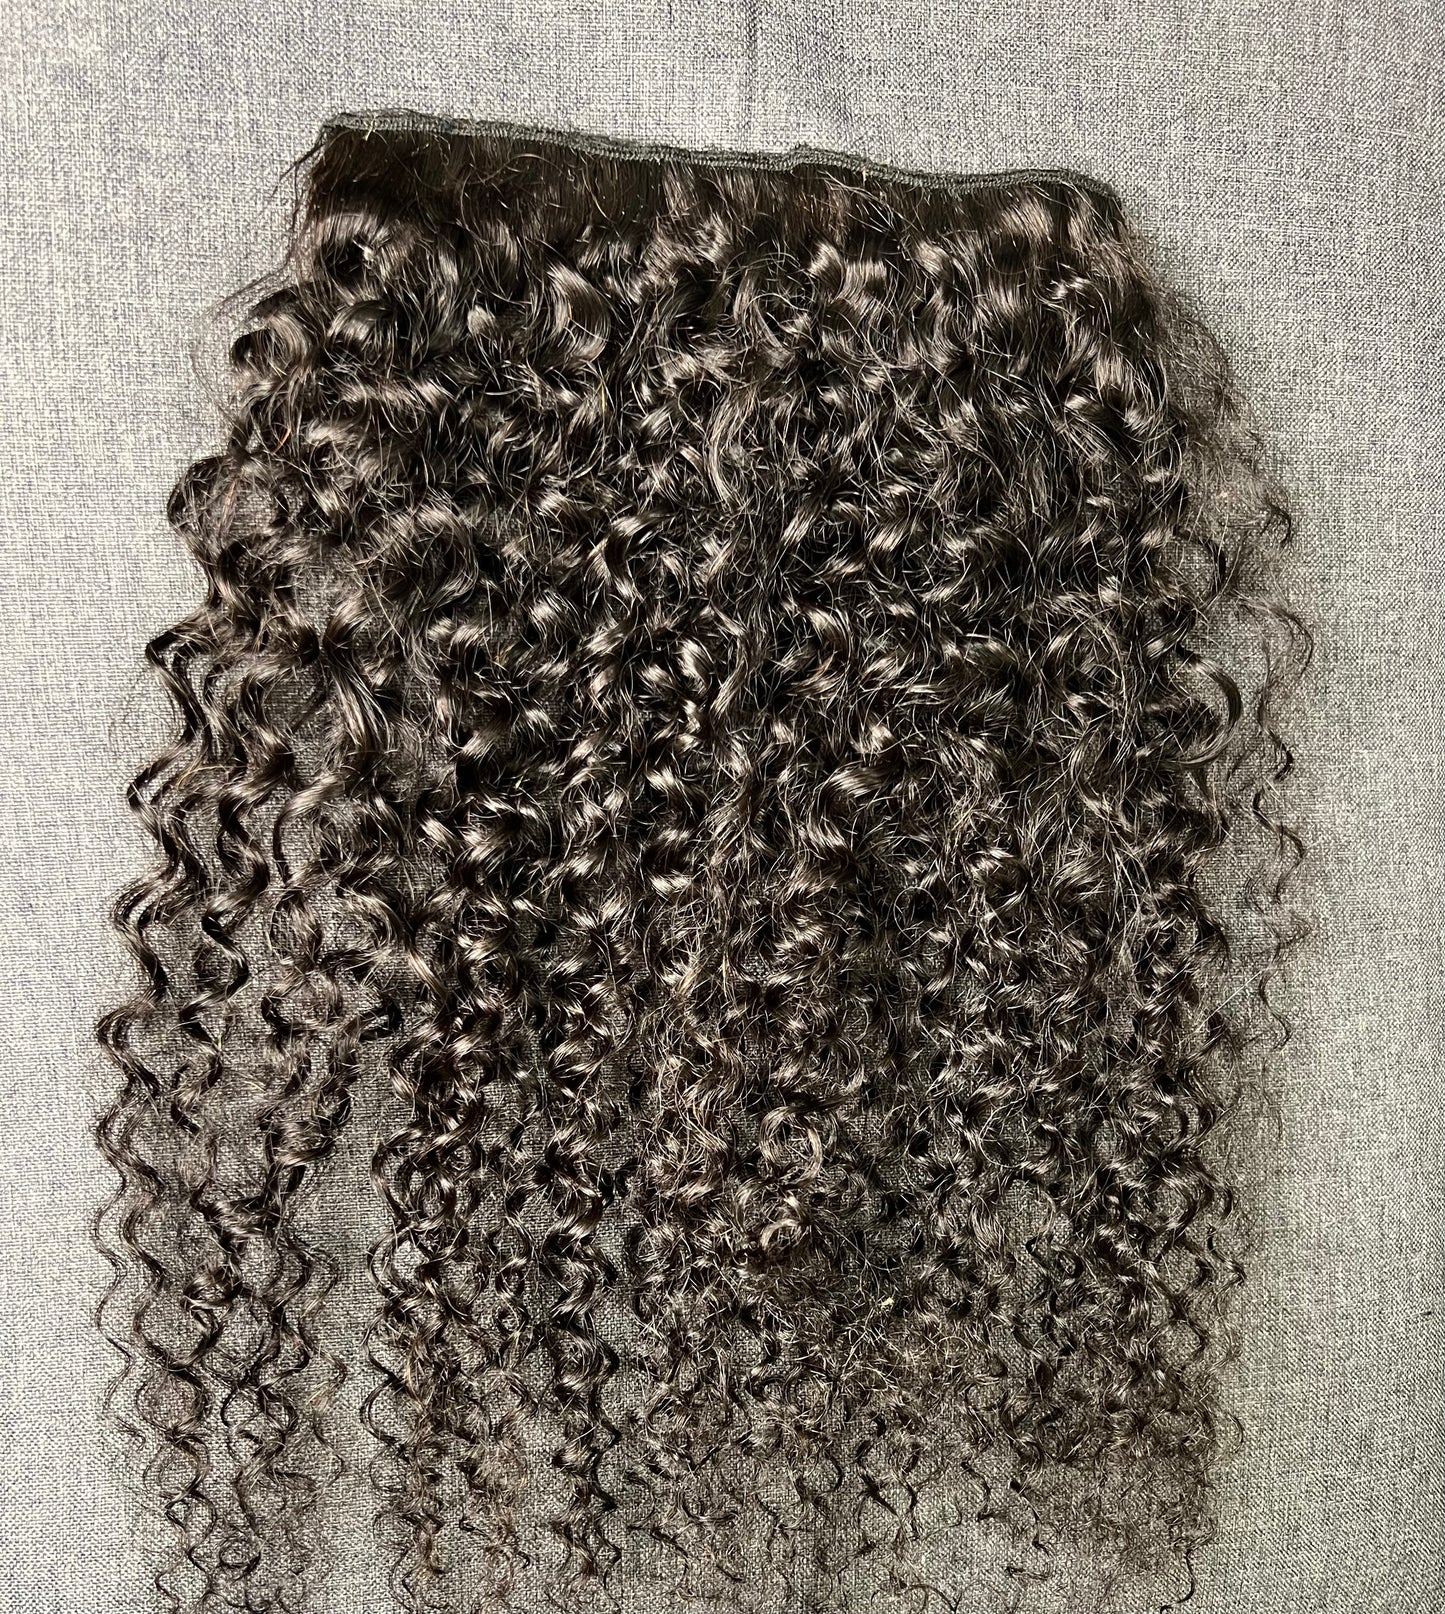 Lockige Clip-in-Extensions